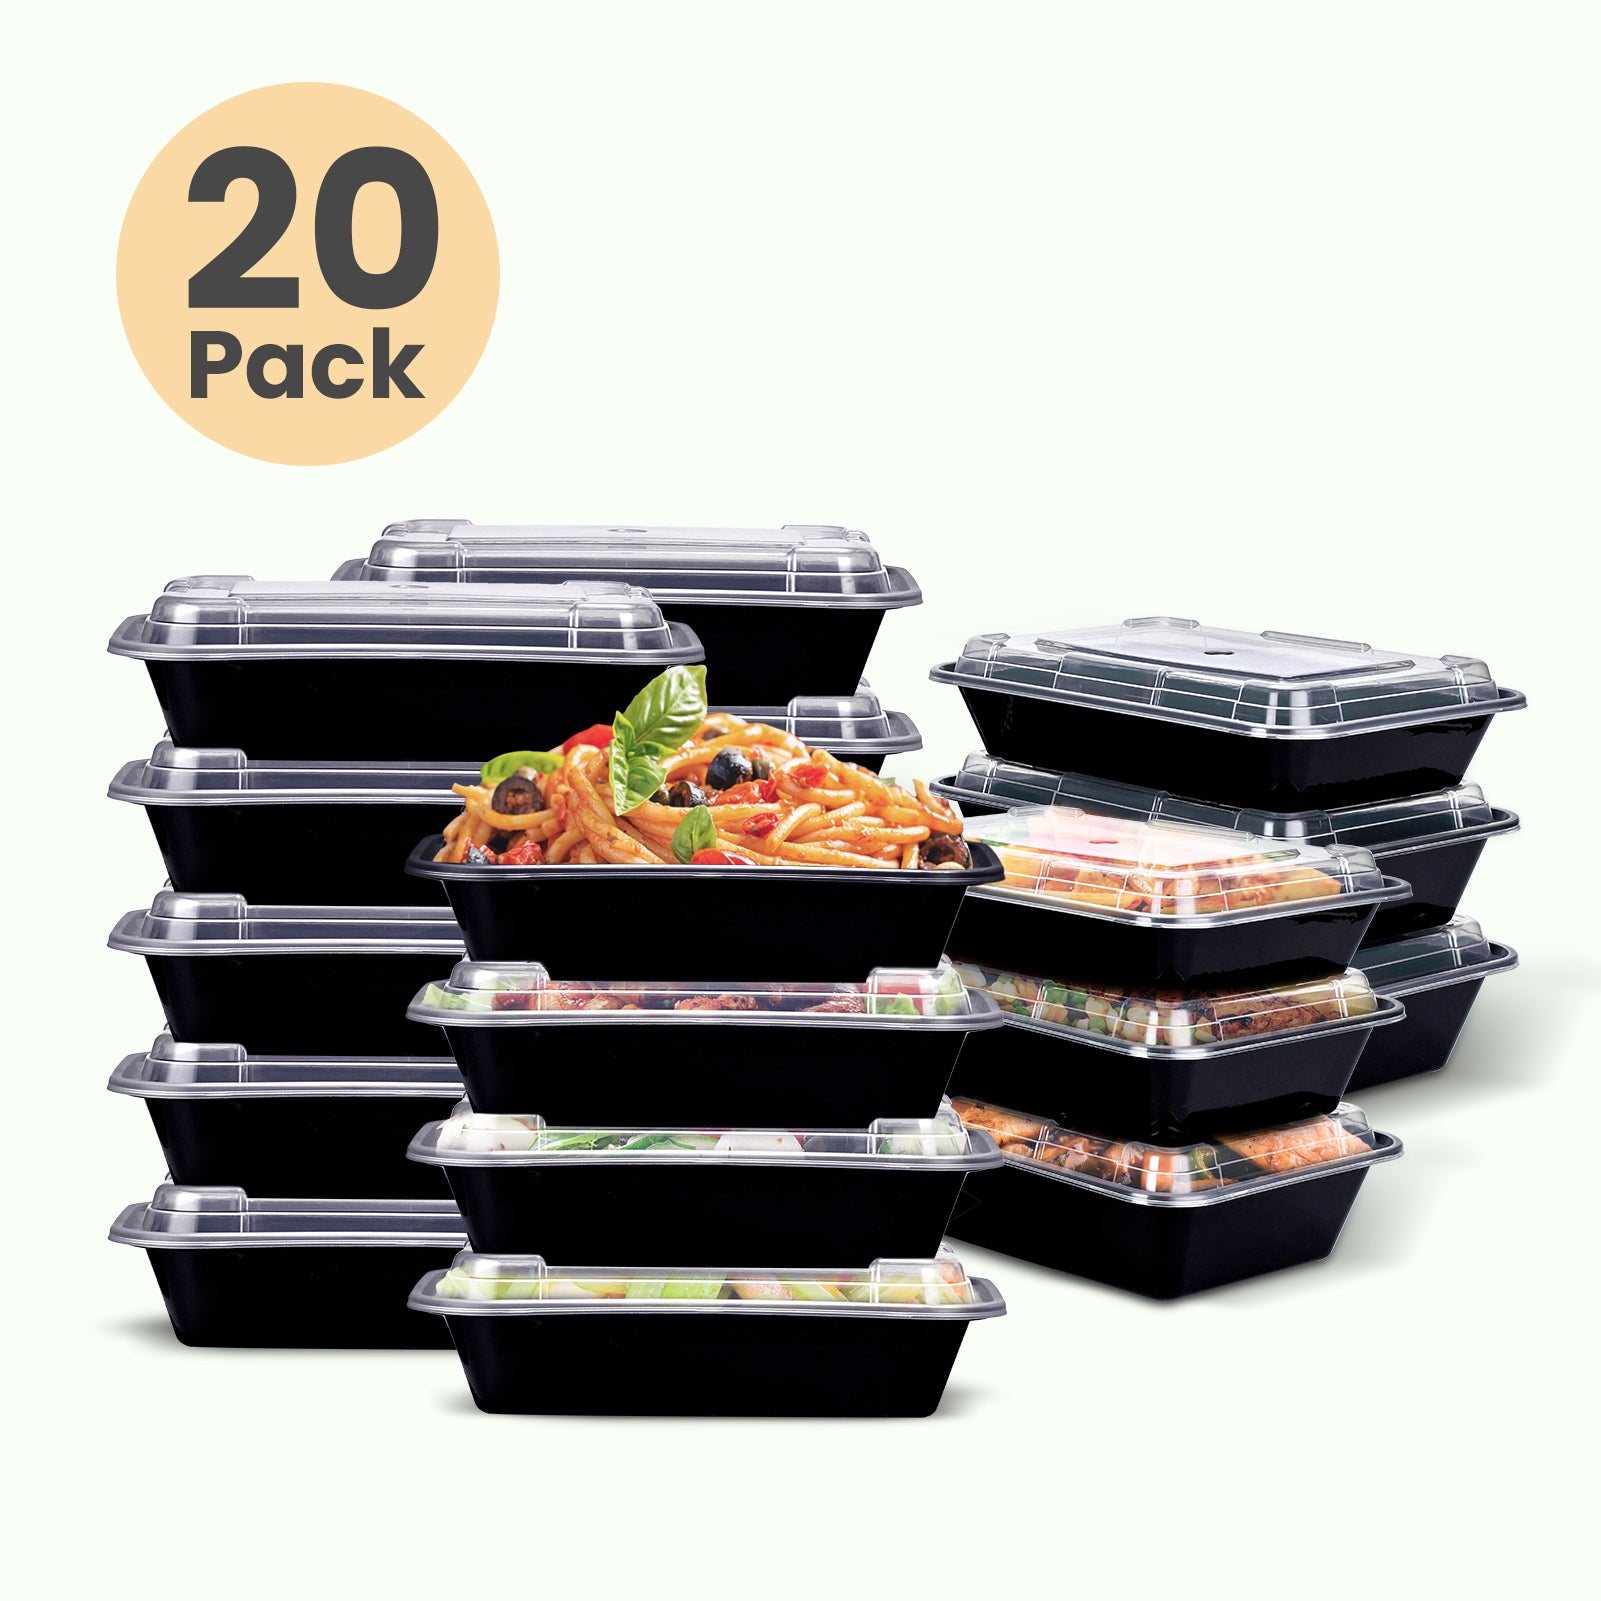 Enther Meal Prep Containers [12 Pack] 3 Compartment with Lids, Food Storage  Bento Box | BPA Free | S…See more Enther Meal Prep Containers [12 Pack] 3